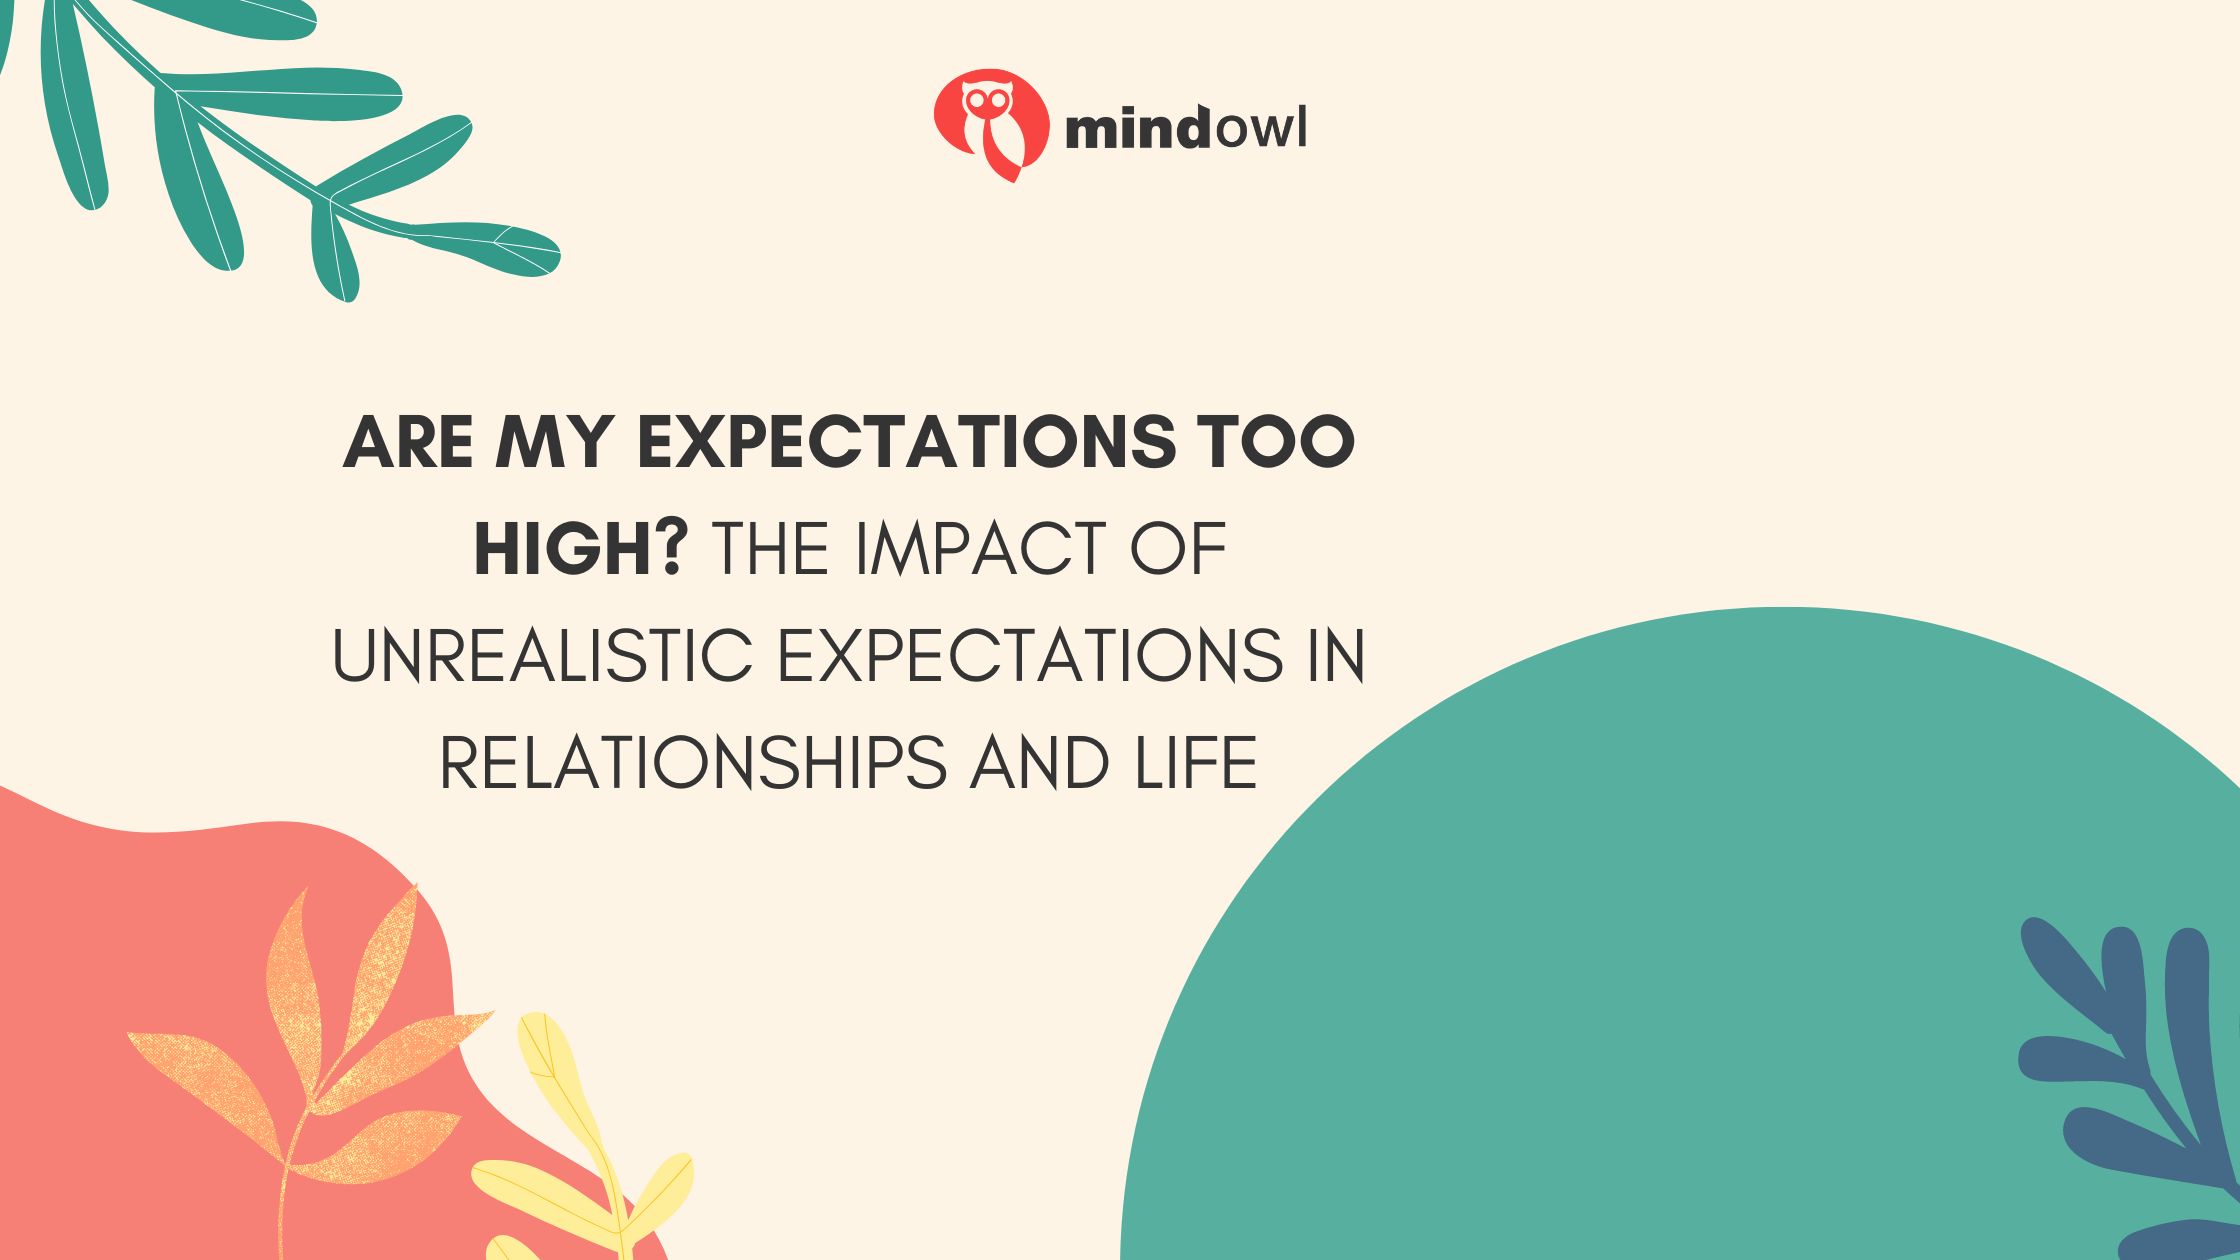 Are My Expectations Too High? The Impact Of Unrealistic Expectations In Relationships And Life